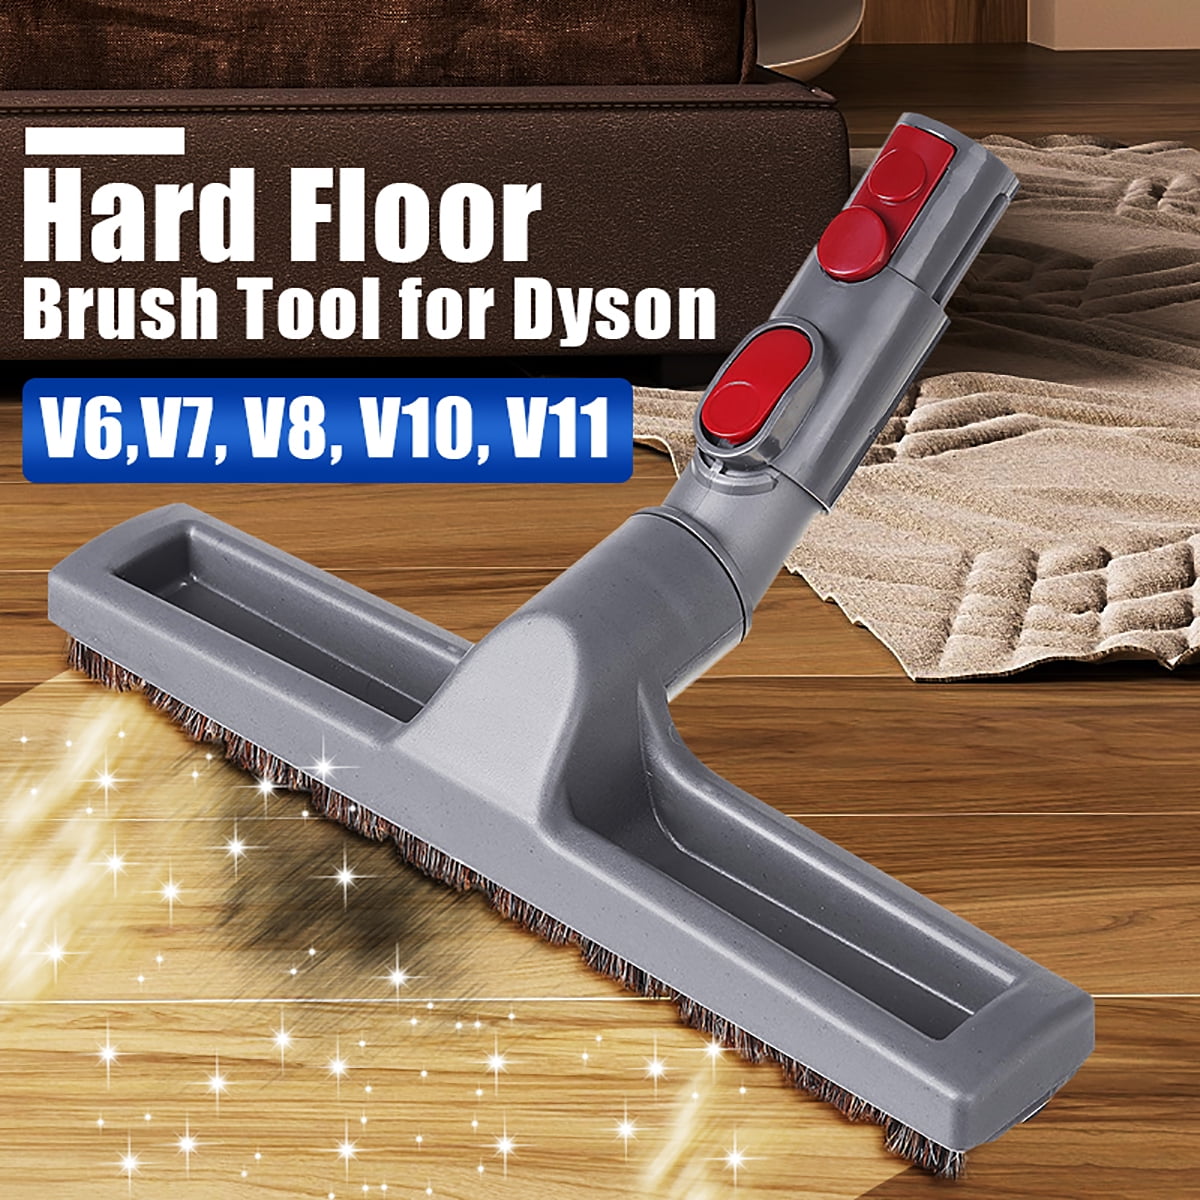 Hardwood Attachment Articulating Vacuum, Which Dyson Attachment Is For Hardwood Floors